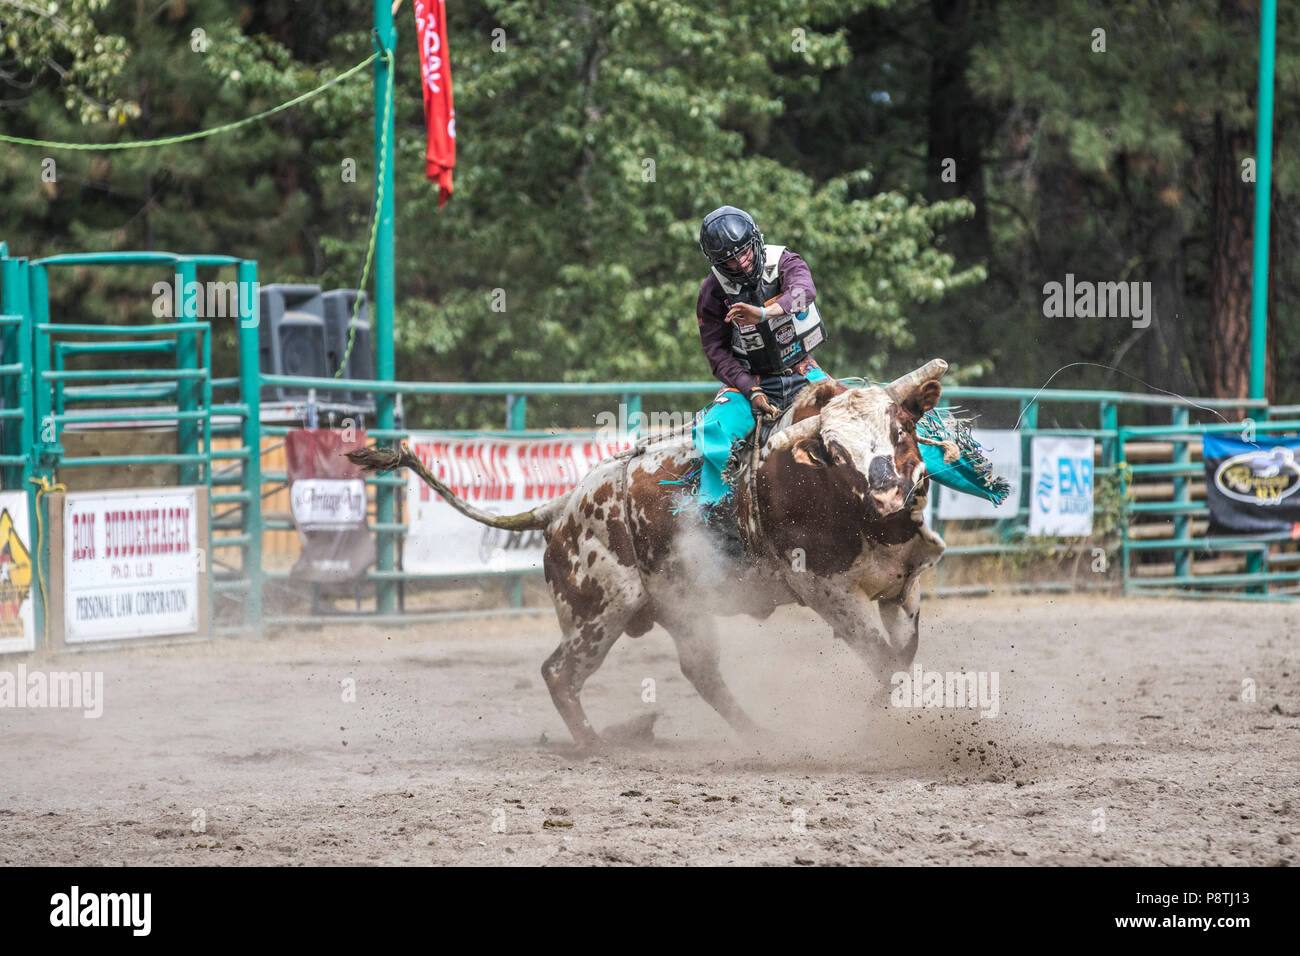 Bull Riding, rodeo's most exciting and dangerous sport. Huge bulls trying to throw the cowboys from there back. Cranbrook, BC, Canada. Garrett mith ri Stock Photo